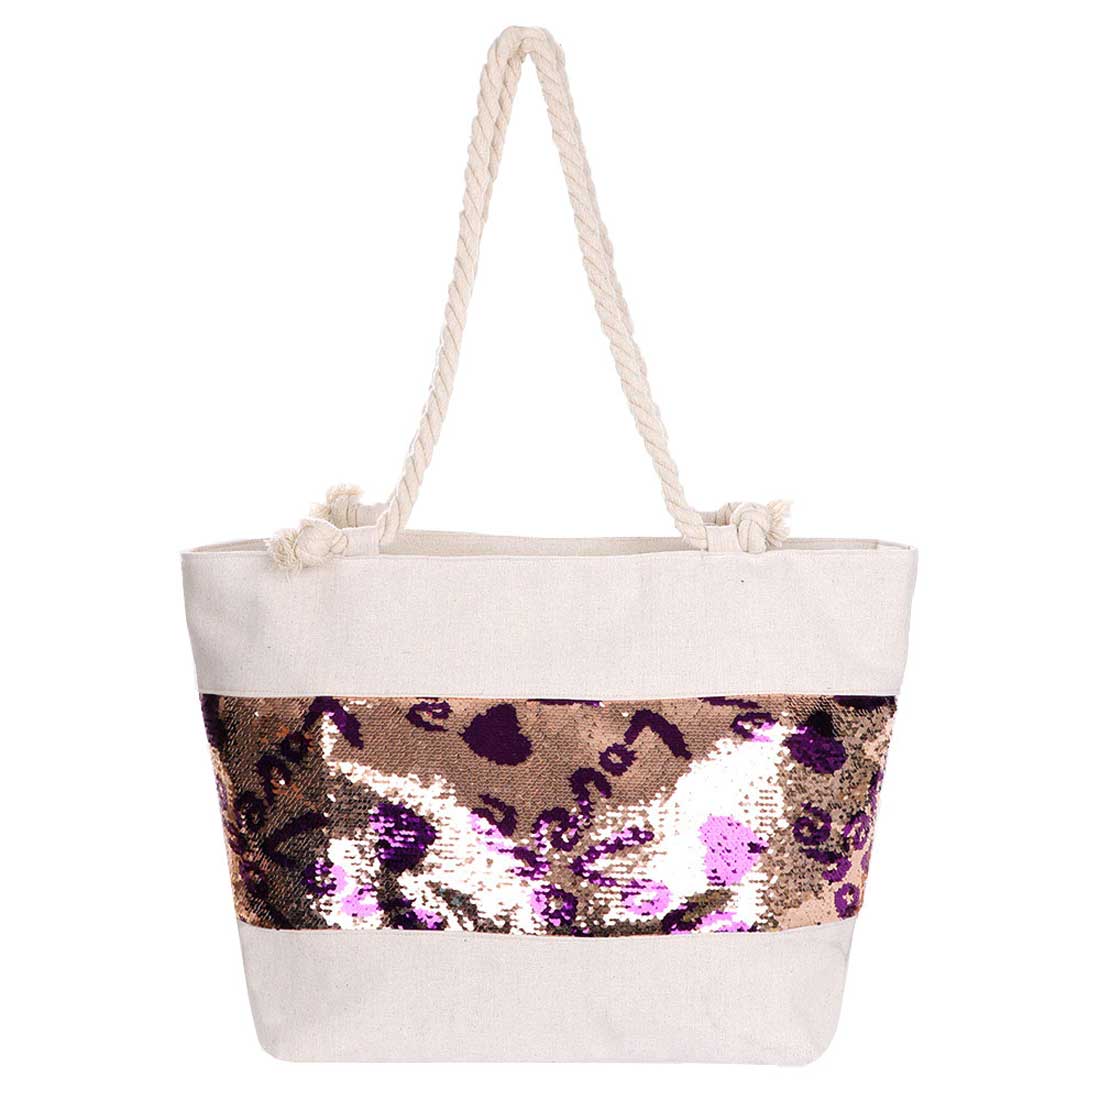 Silver Sequin Love Heart Rope Tote Beach Bag. Show your trendy side with this awesome Love Heart tote bag. This fashionable bag will be your new favorite accessory. Perfectly lightweight to carry around all day. Perfect Birthday Gift, Anniversary Gift, Mother's Day Gift, Valentine's Day Gift.